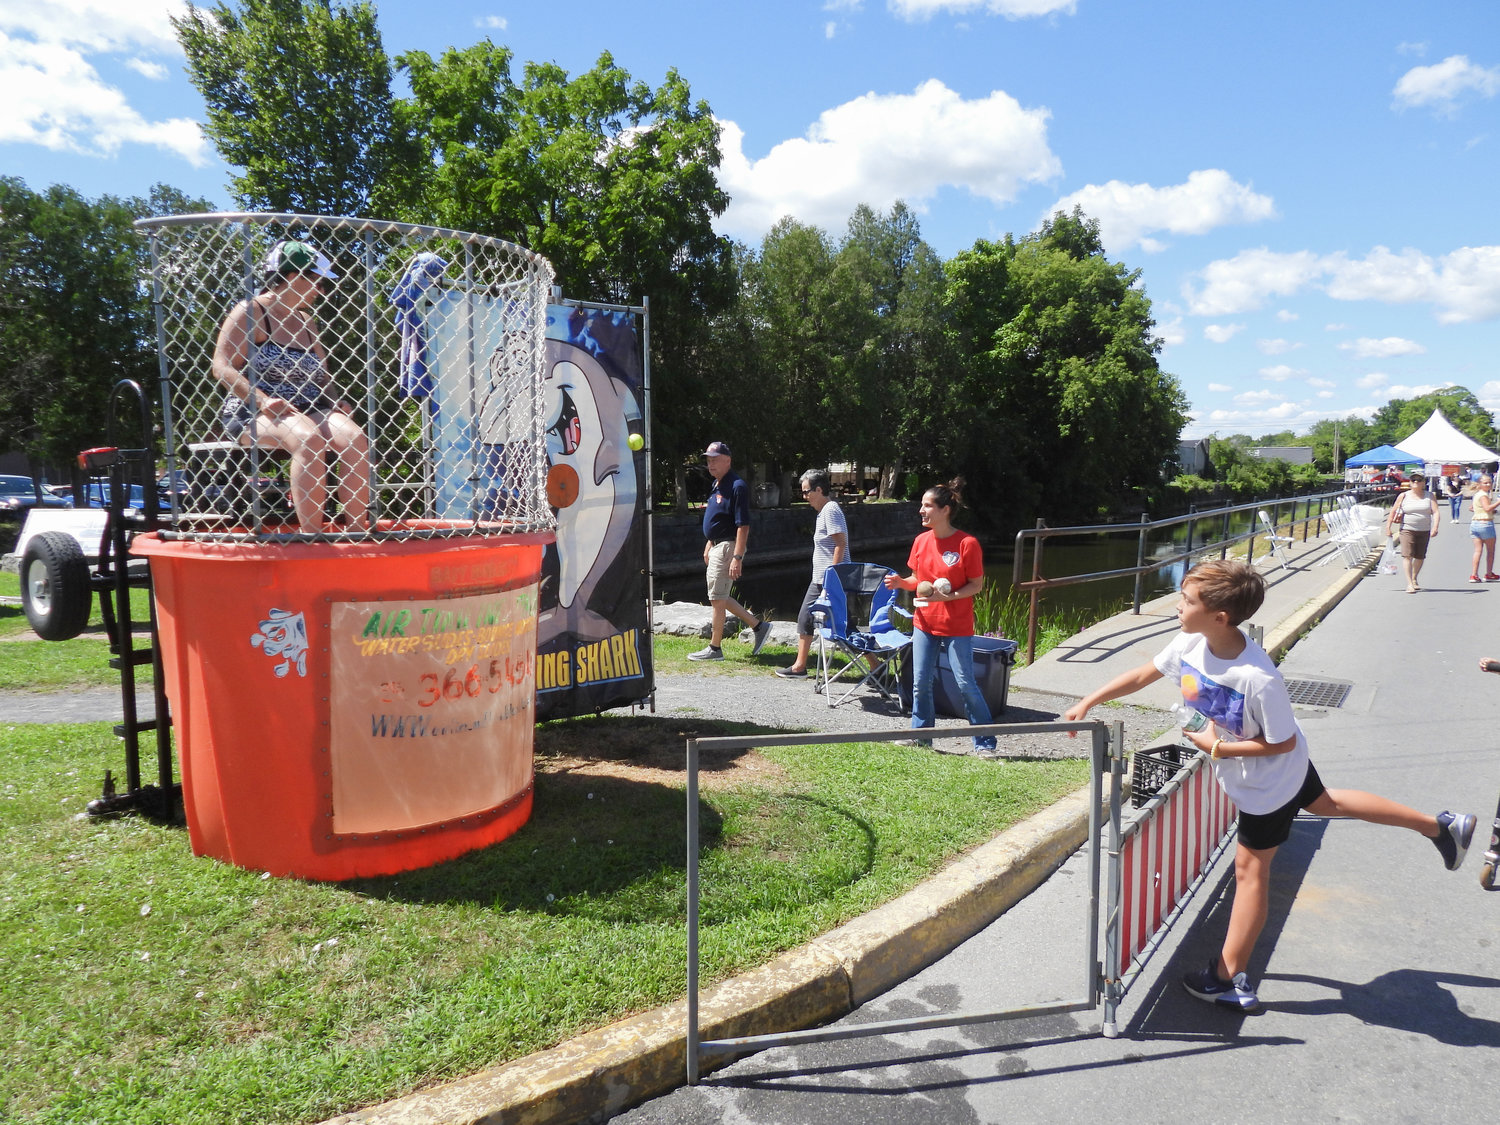 Residents came out for a day of fun and a taste of Italy at the Canastota Italian Heritage Festival on Saturday, Aug. 13. Canastota Mayor Rosanne Warner spends some time in the dunk tank at the Canastota Italian Heritage Festival to the delight of festival-goers and the mayor herself.